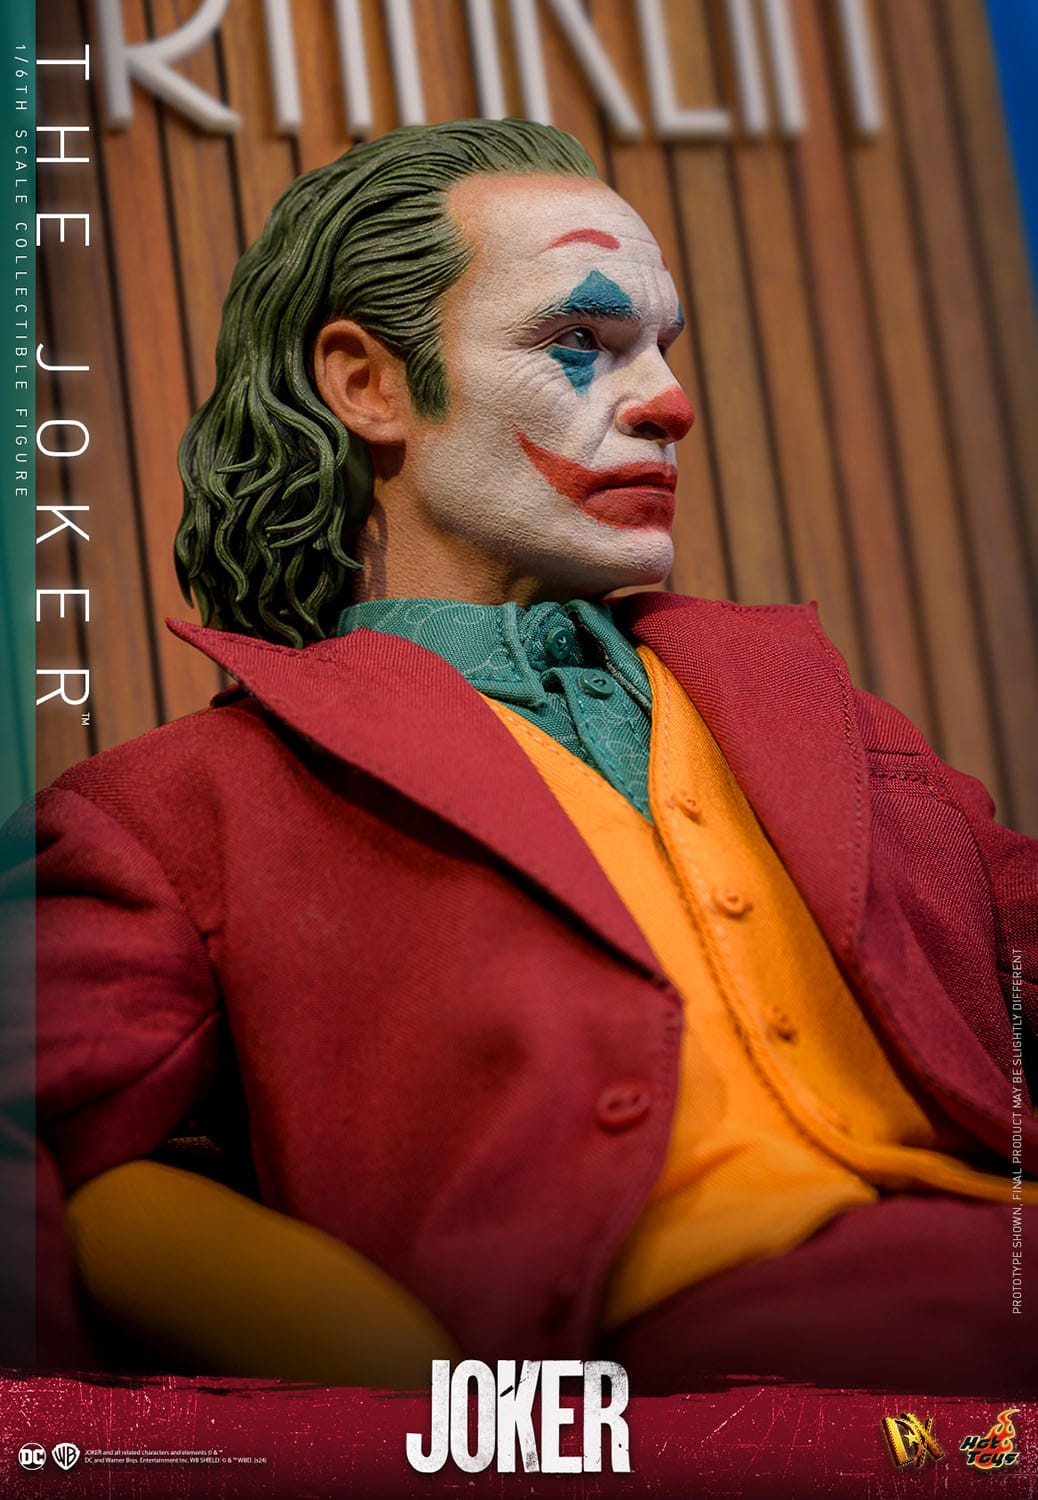 Hot Toys The Joker Movie Masterpiece 1/6th Scale Figure